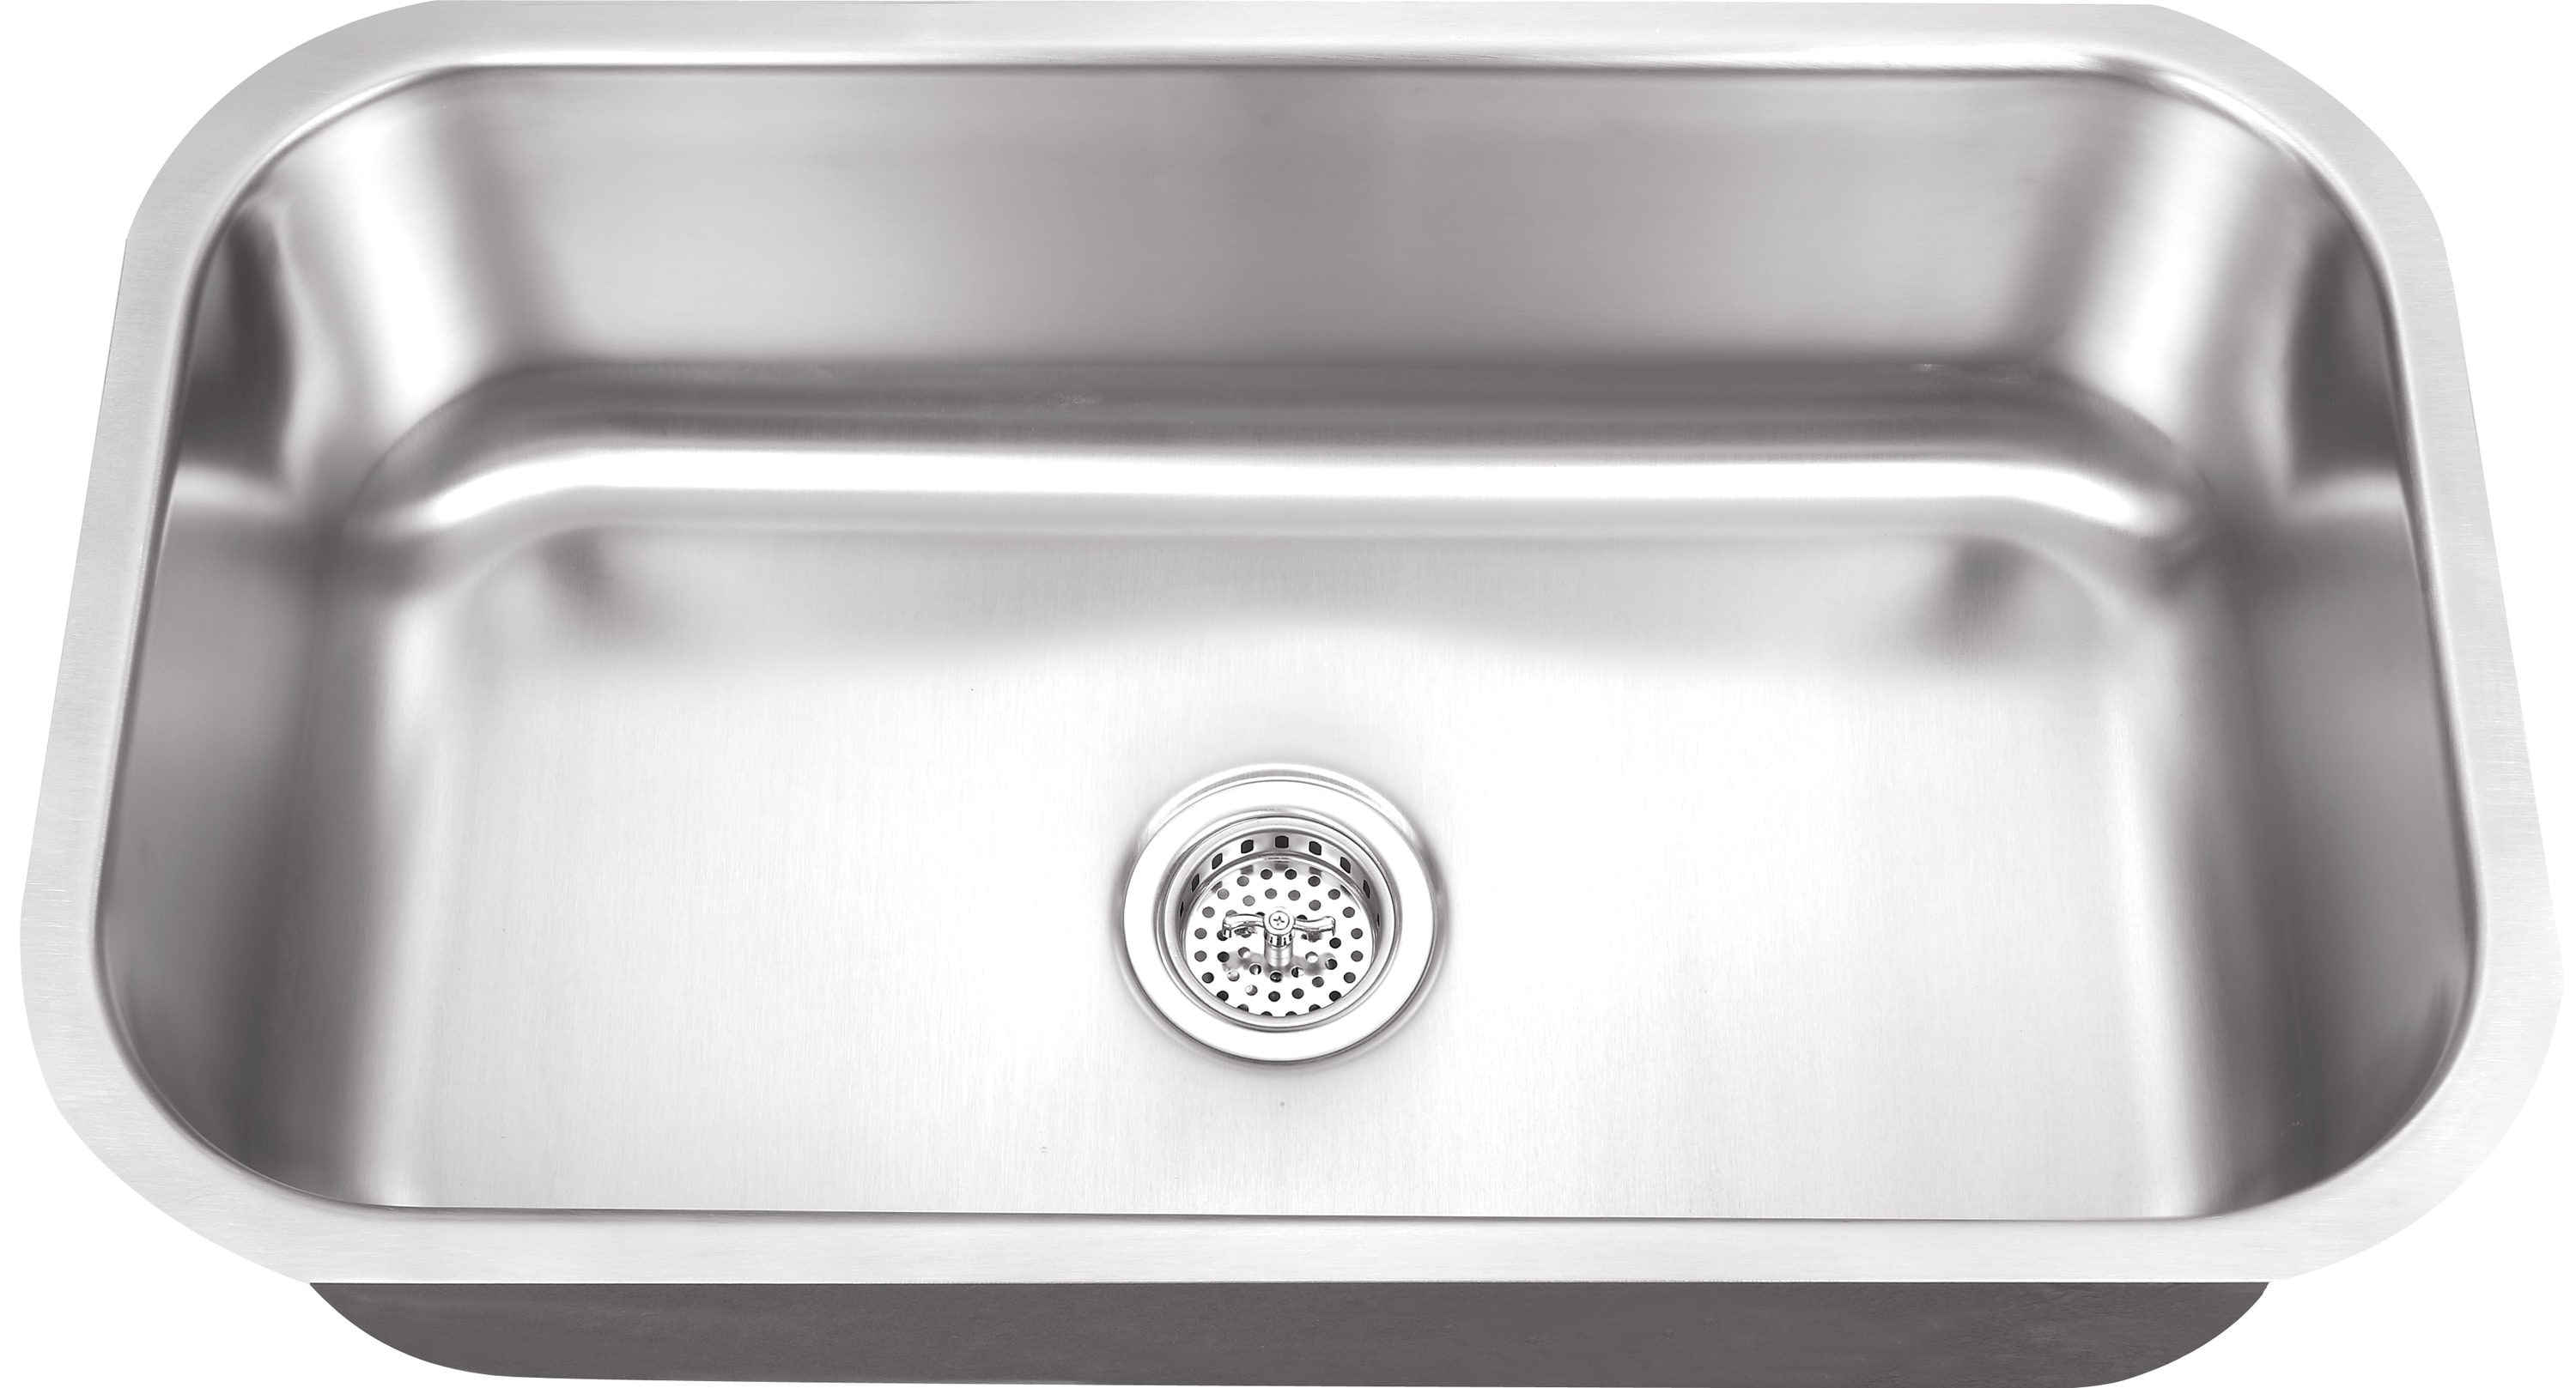 Superior Sinks Undermount 29.75-in x 18-in Brushed Satin Single Bowl Stainless Steel Kitchen Sink